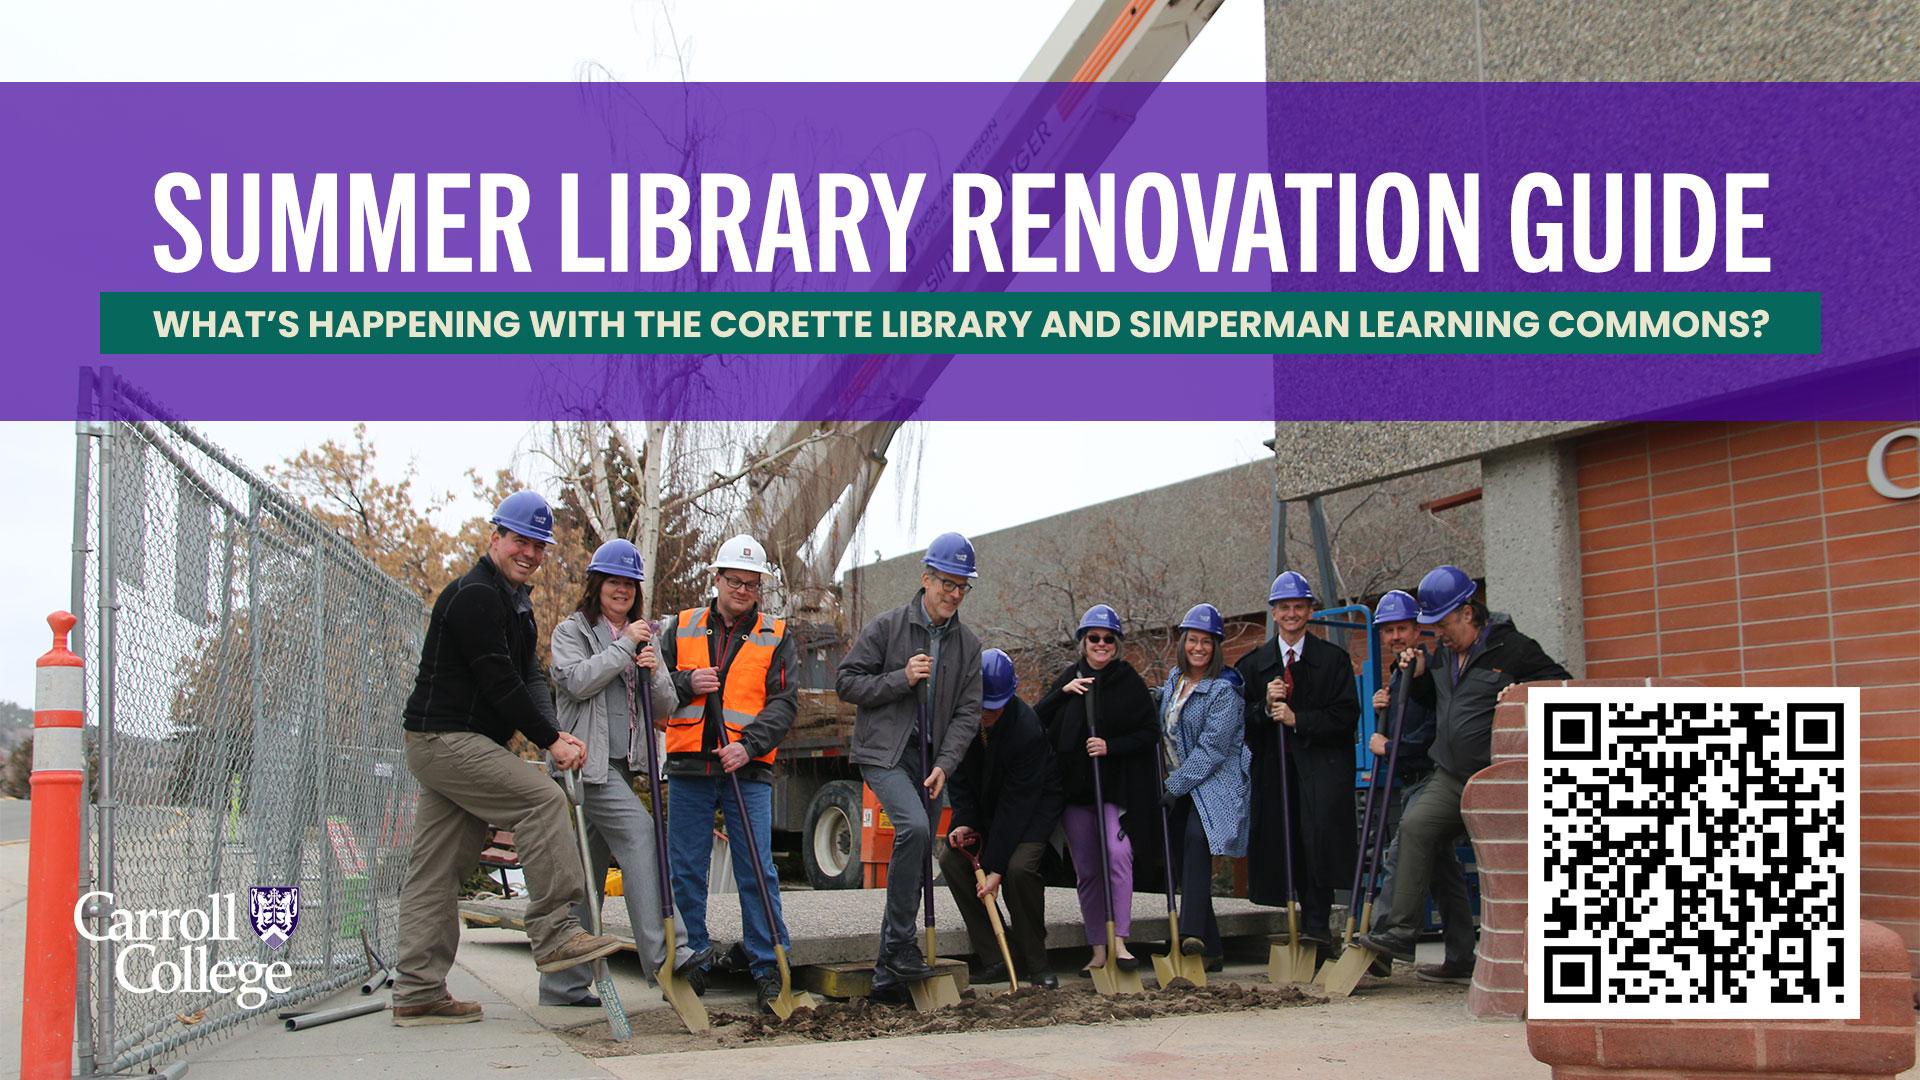 Summer Library Renovation Guide graphic